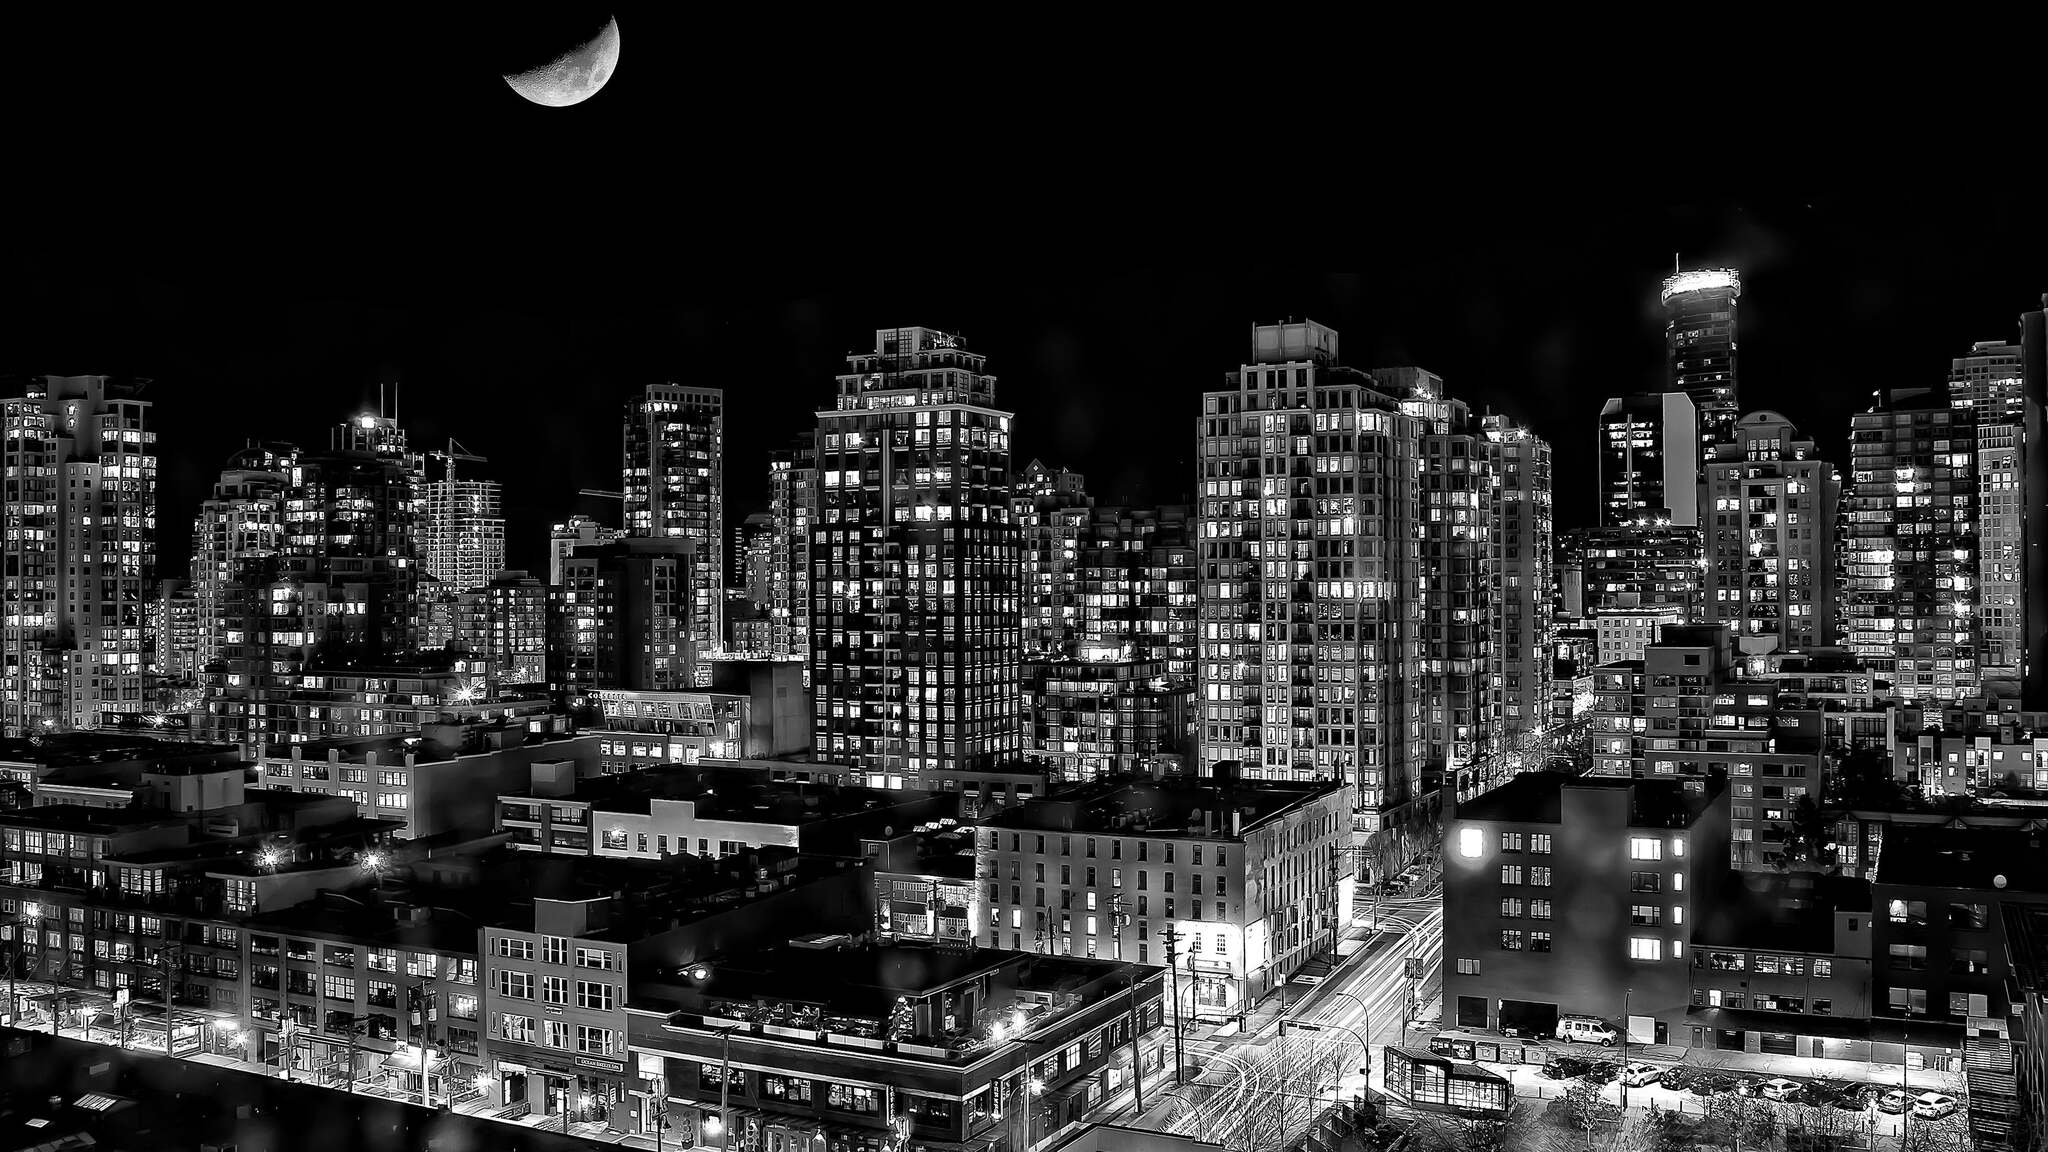 A black and white photo of a city at night with a half moon in the sky. - City, 2048x1152, black and white